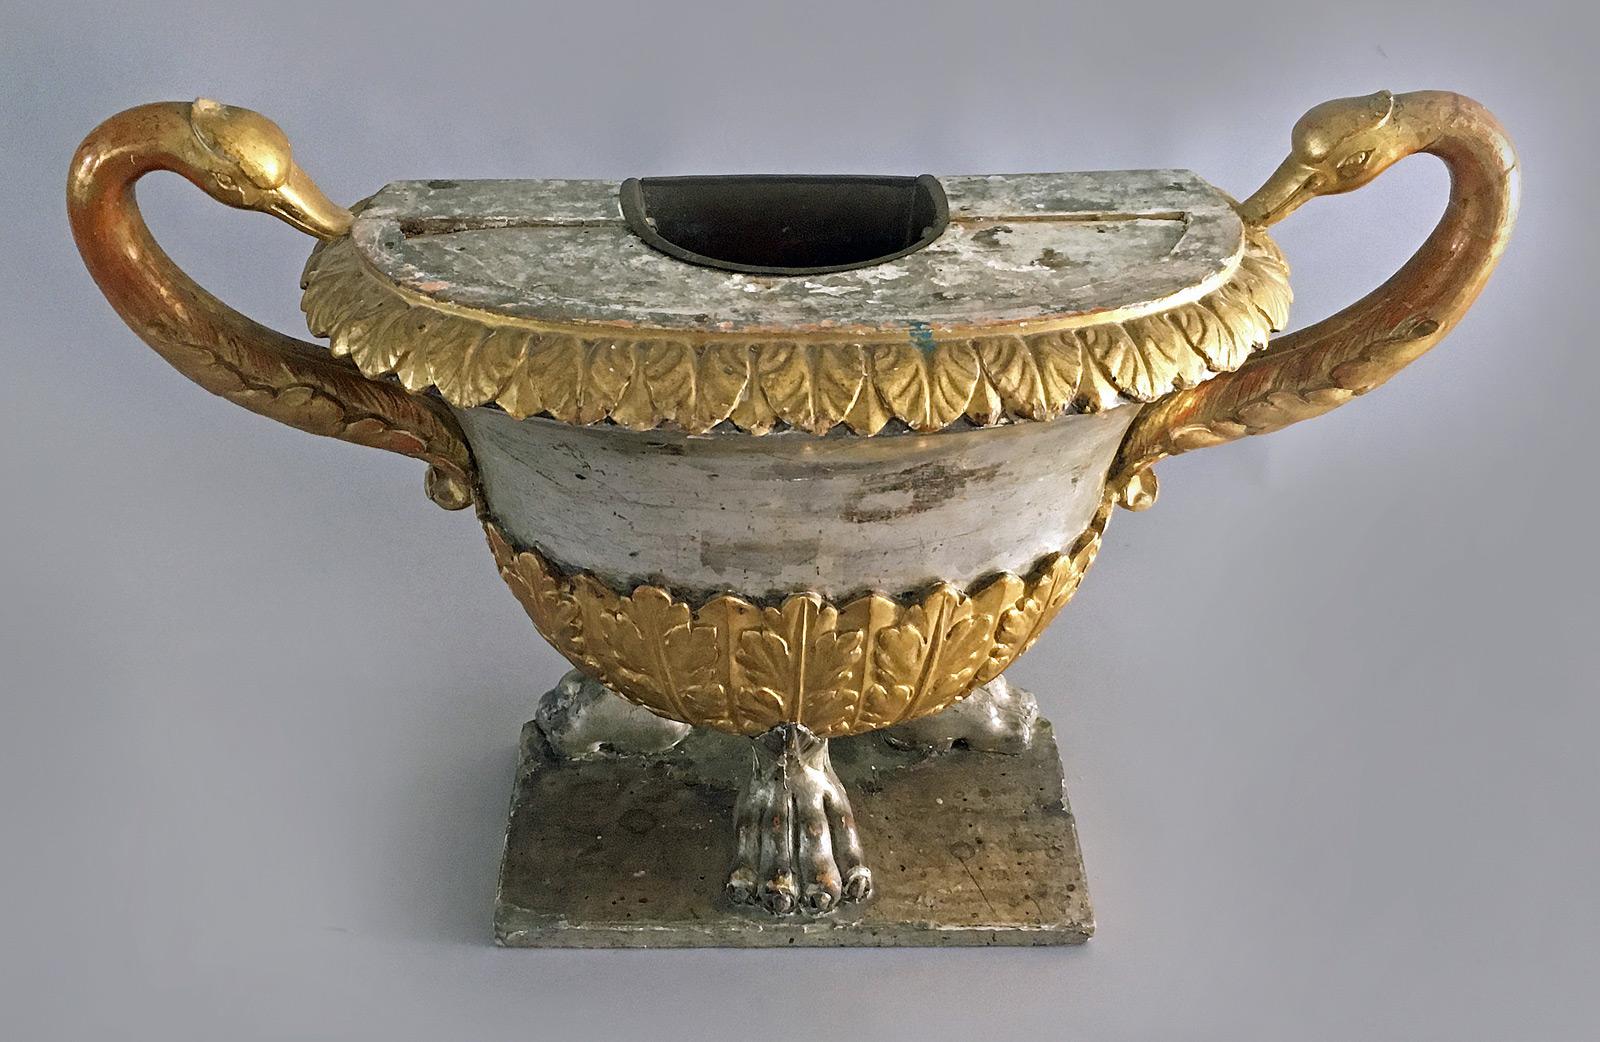 Antique Swedish Gustavian vase-shaped jardinière with large swan neck handles. The top edge is carved with a border of gilded acanthus leaves, above a silvered body, above carved and gilded rows of vertical acanthus leaves, ending with boldly carved